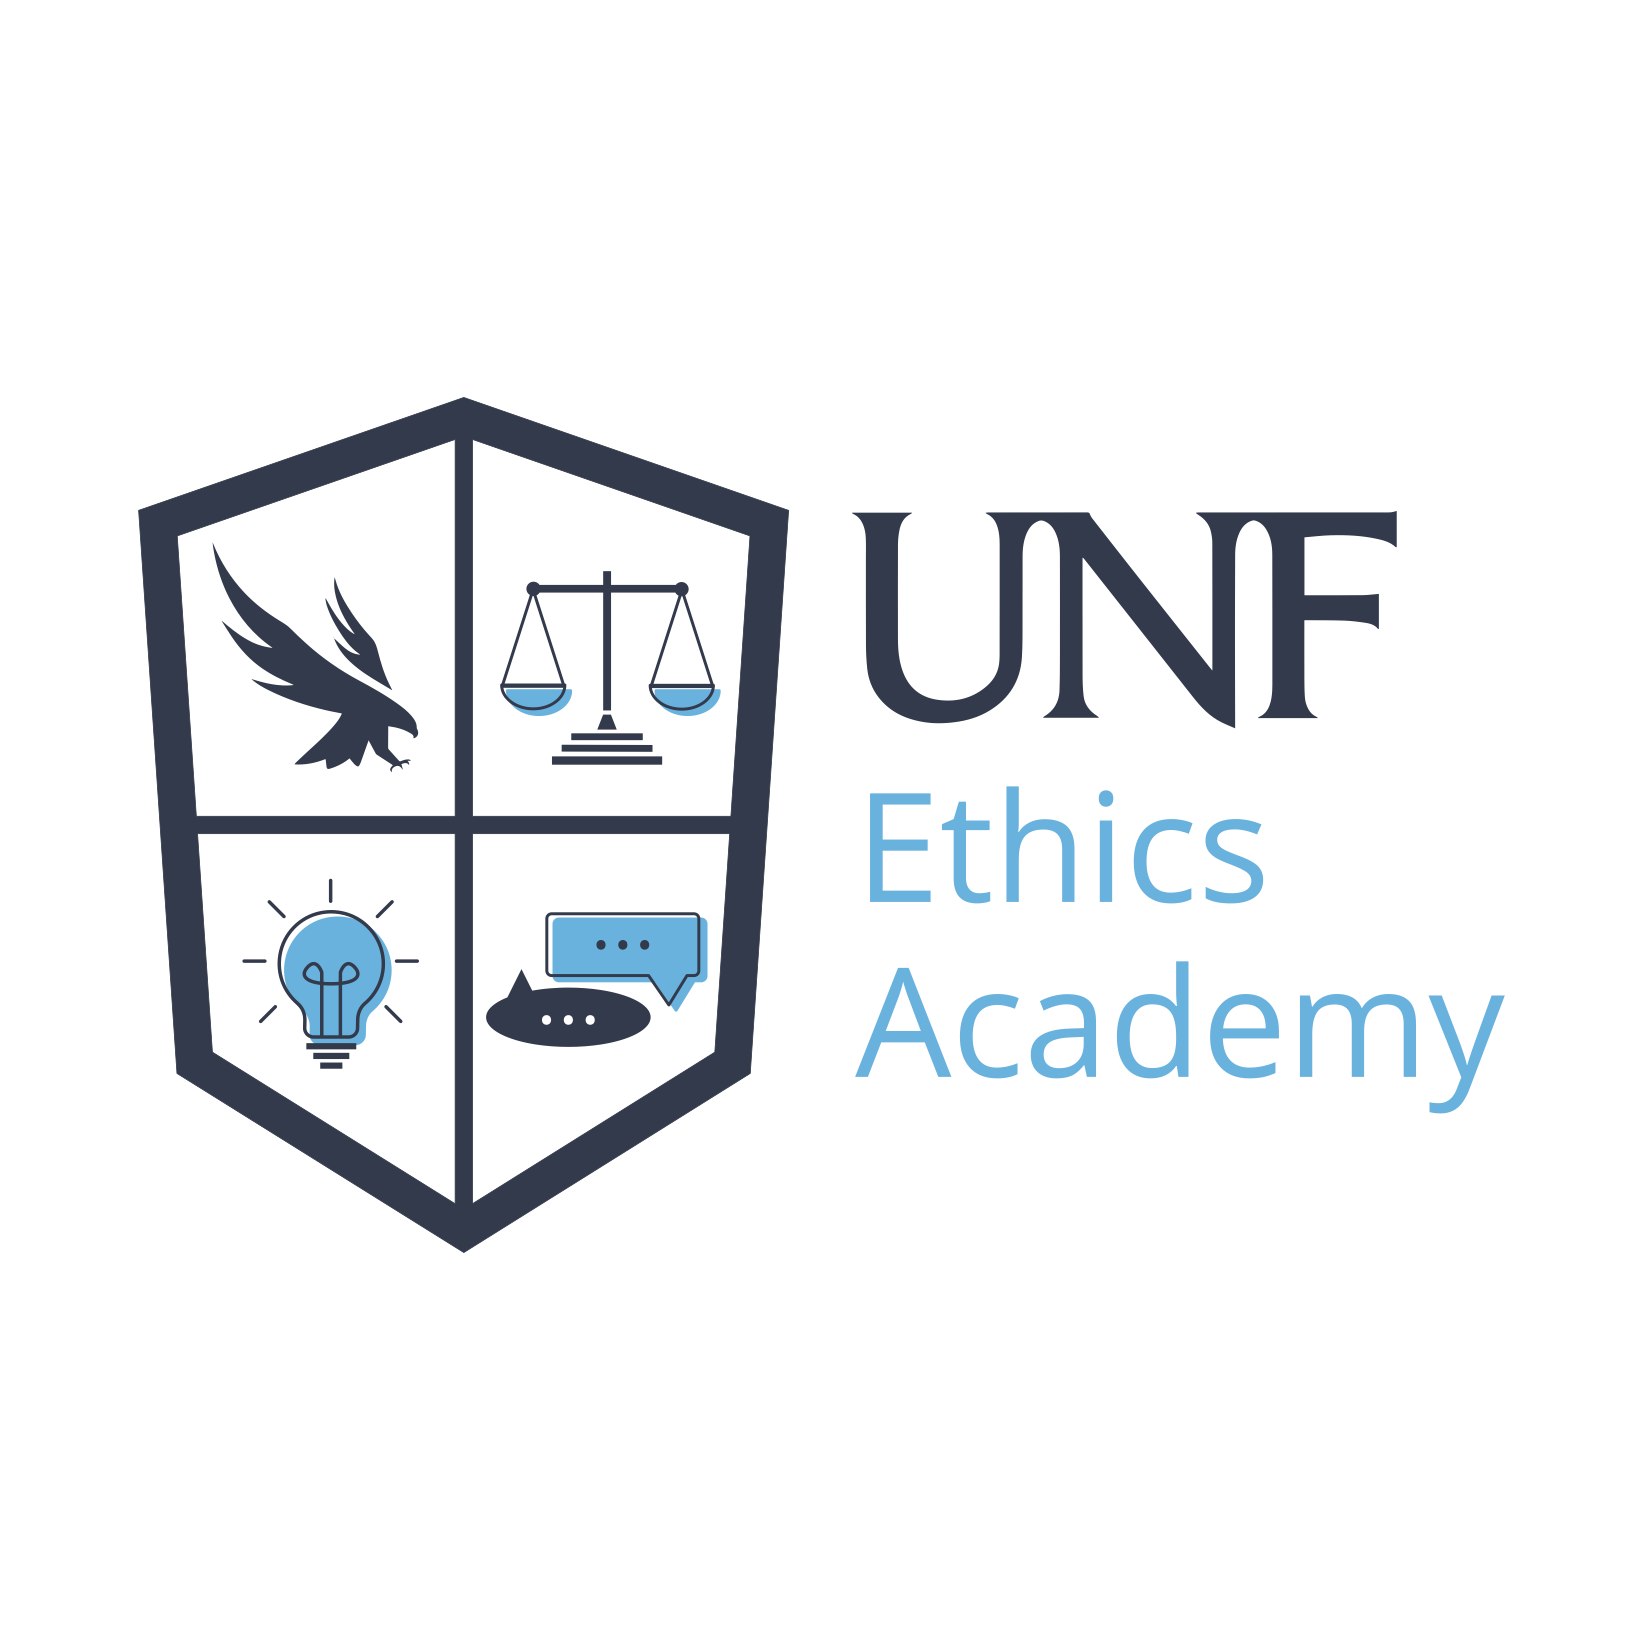 UNF Ethics Academy Logo, image of a shield with four quadrants with images, including an Osprey, the scales of justice, a light bulb, and dialogue bubbles, along with the words "UNF Ethics Academy", in dark blue and cyan blue